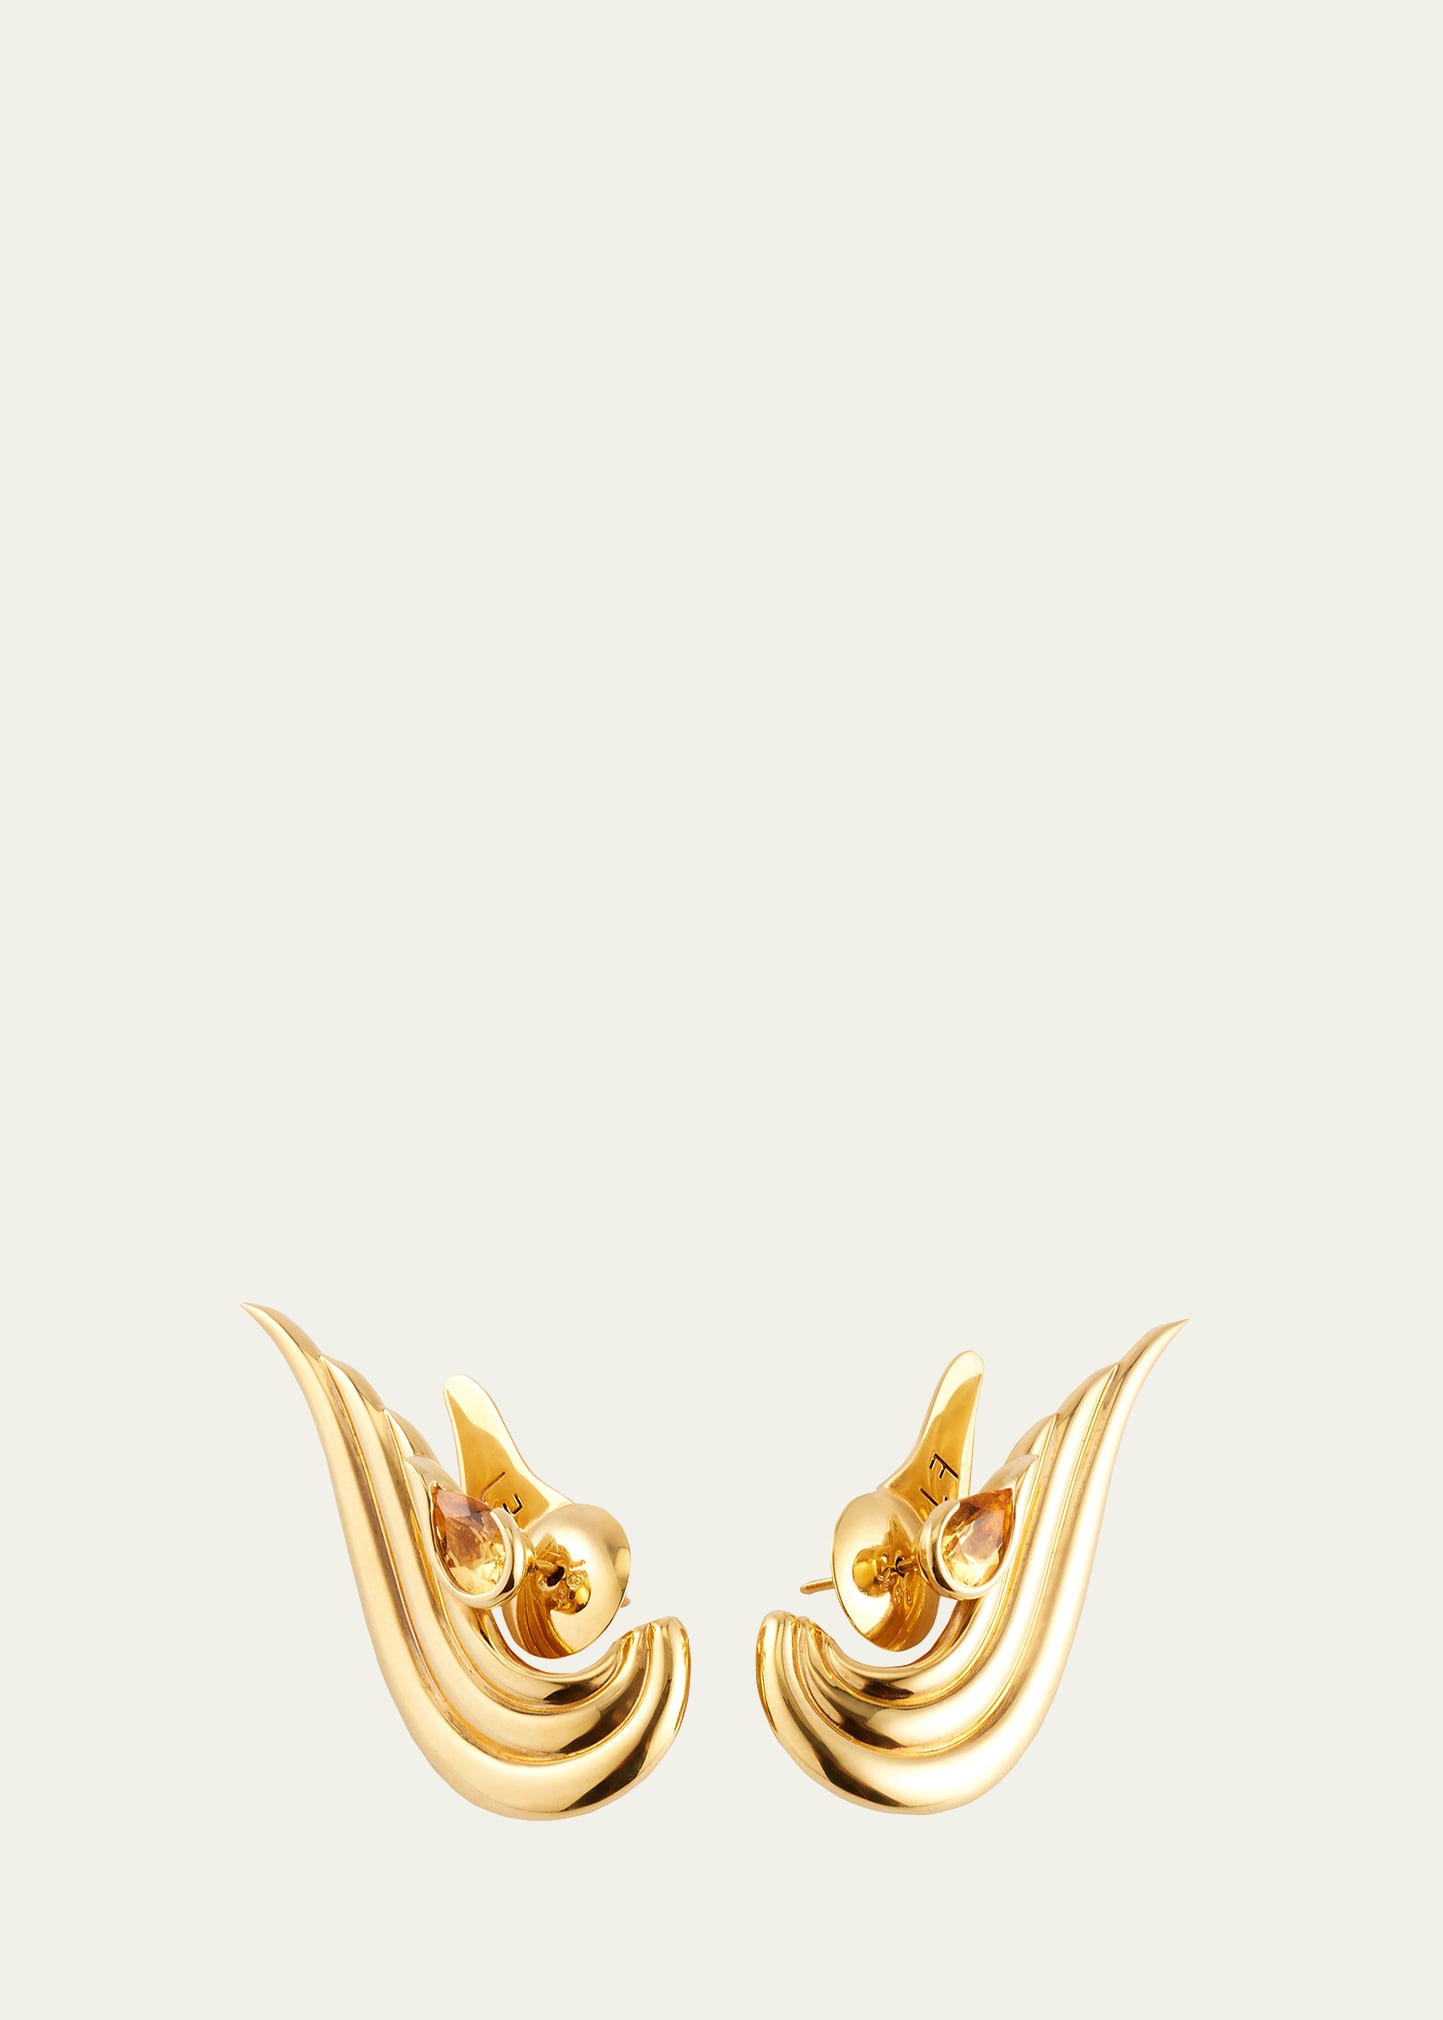 Fernando Jorge Kindle Winged Earrings in 18k Yellow Gold and Citrine